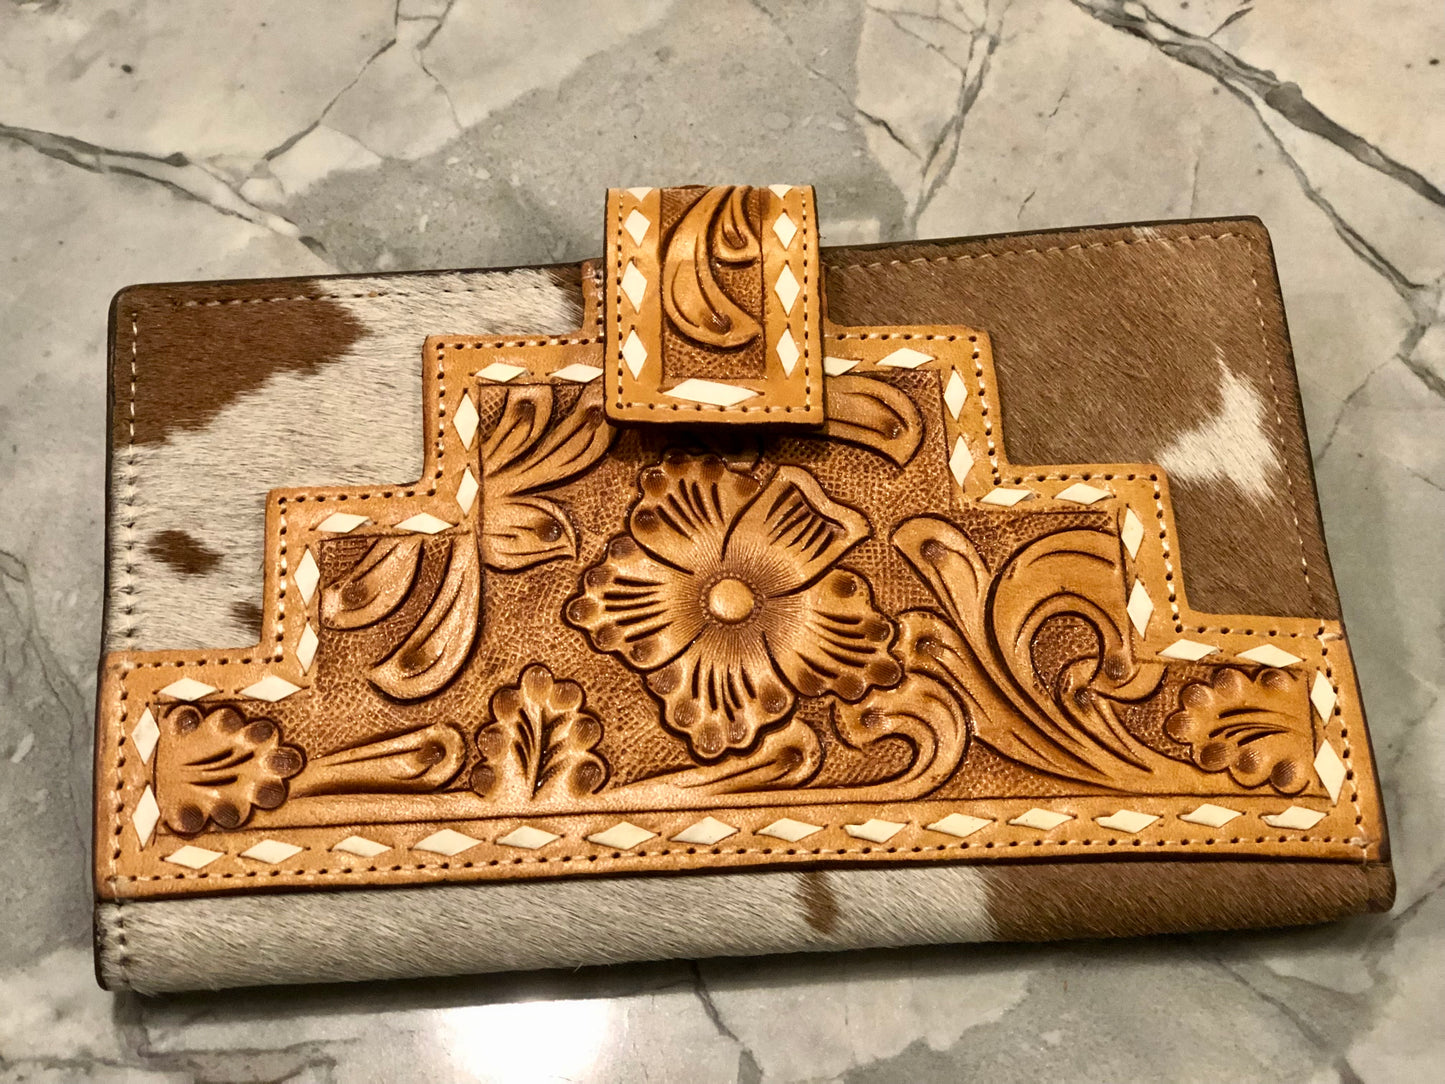 Eliza cowhide leather tooled wallet